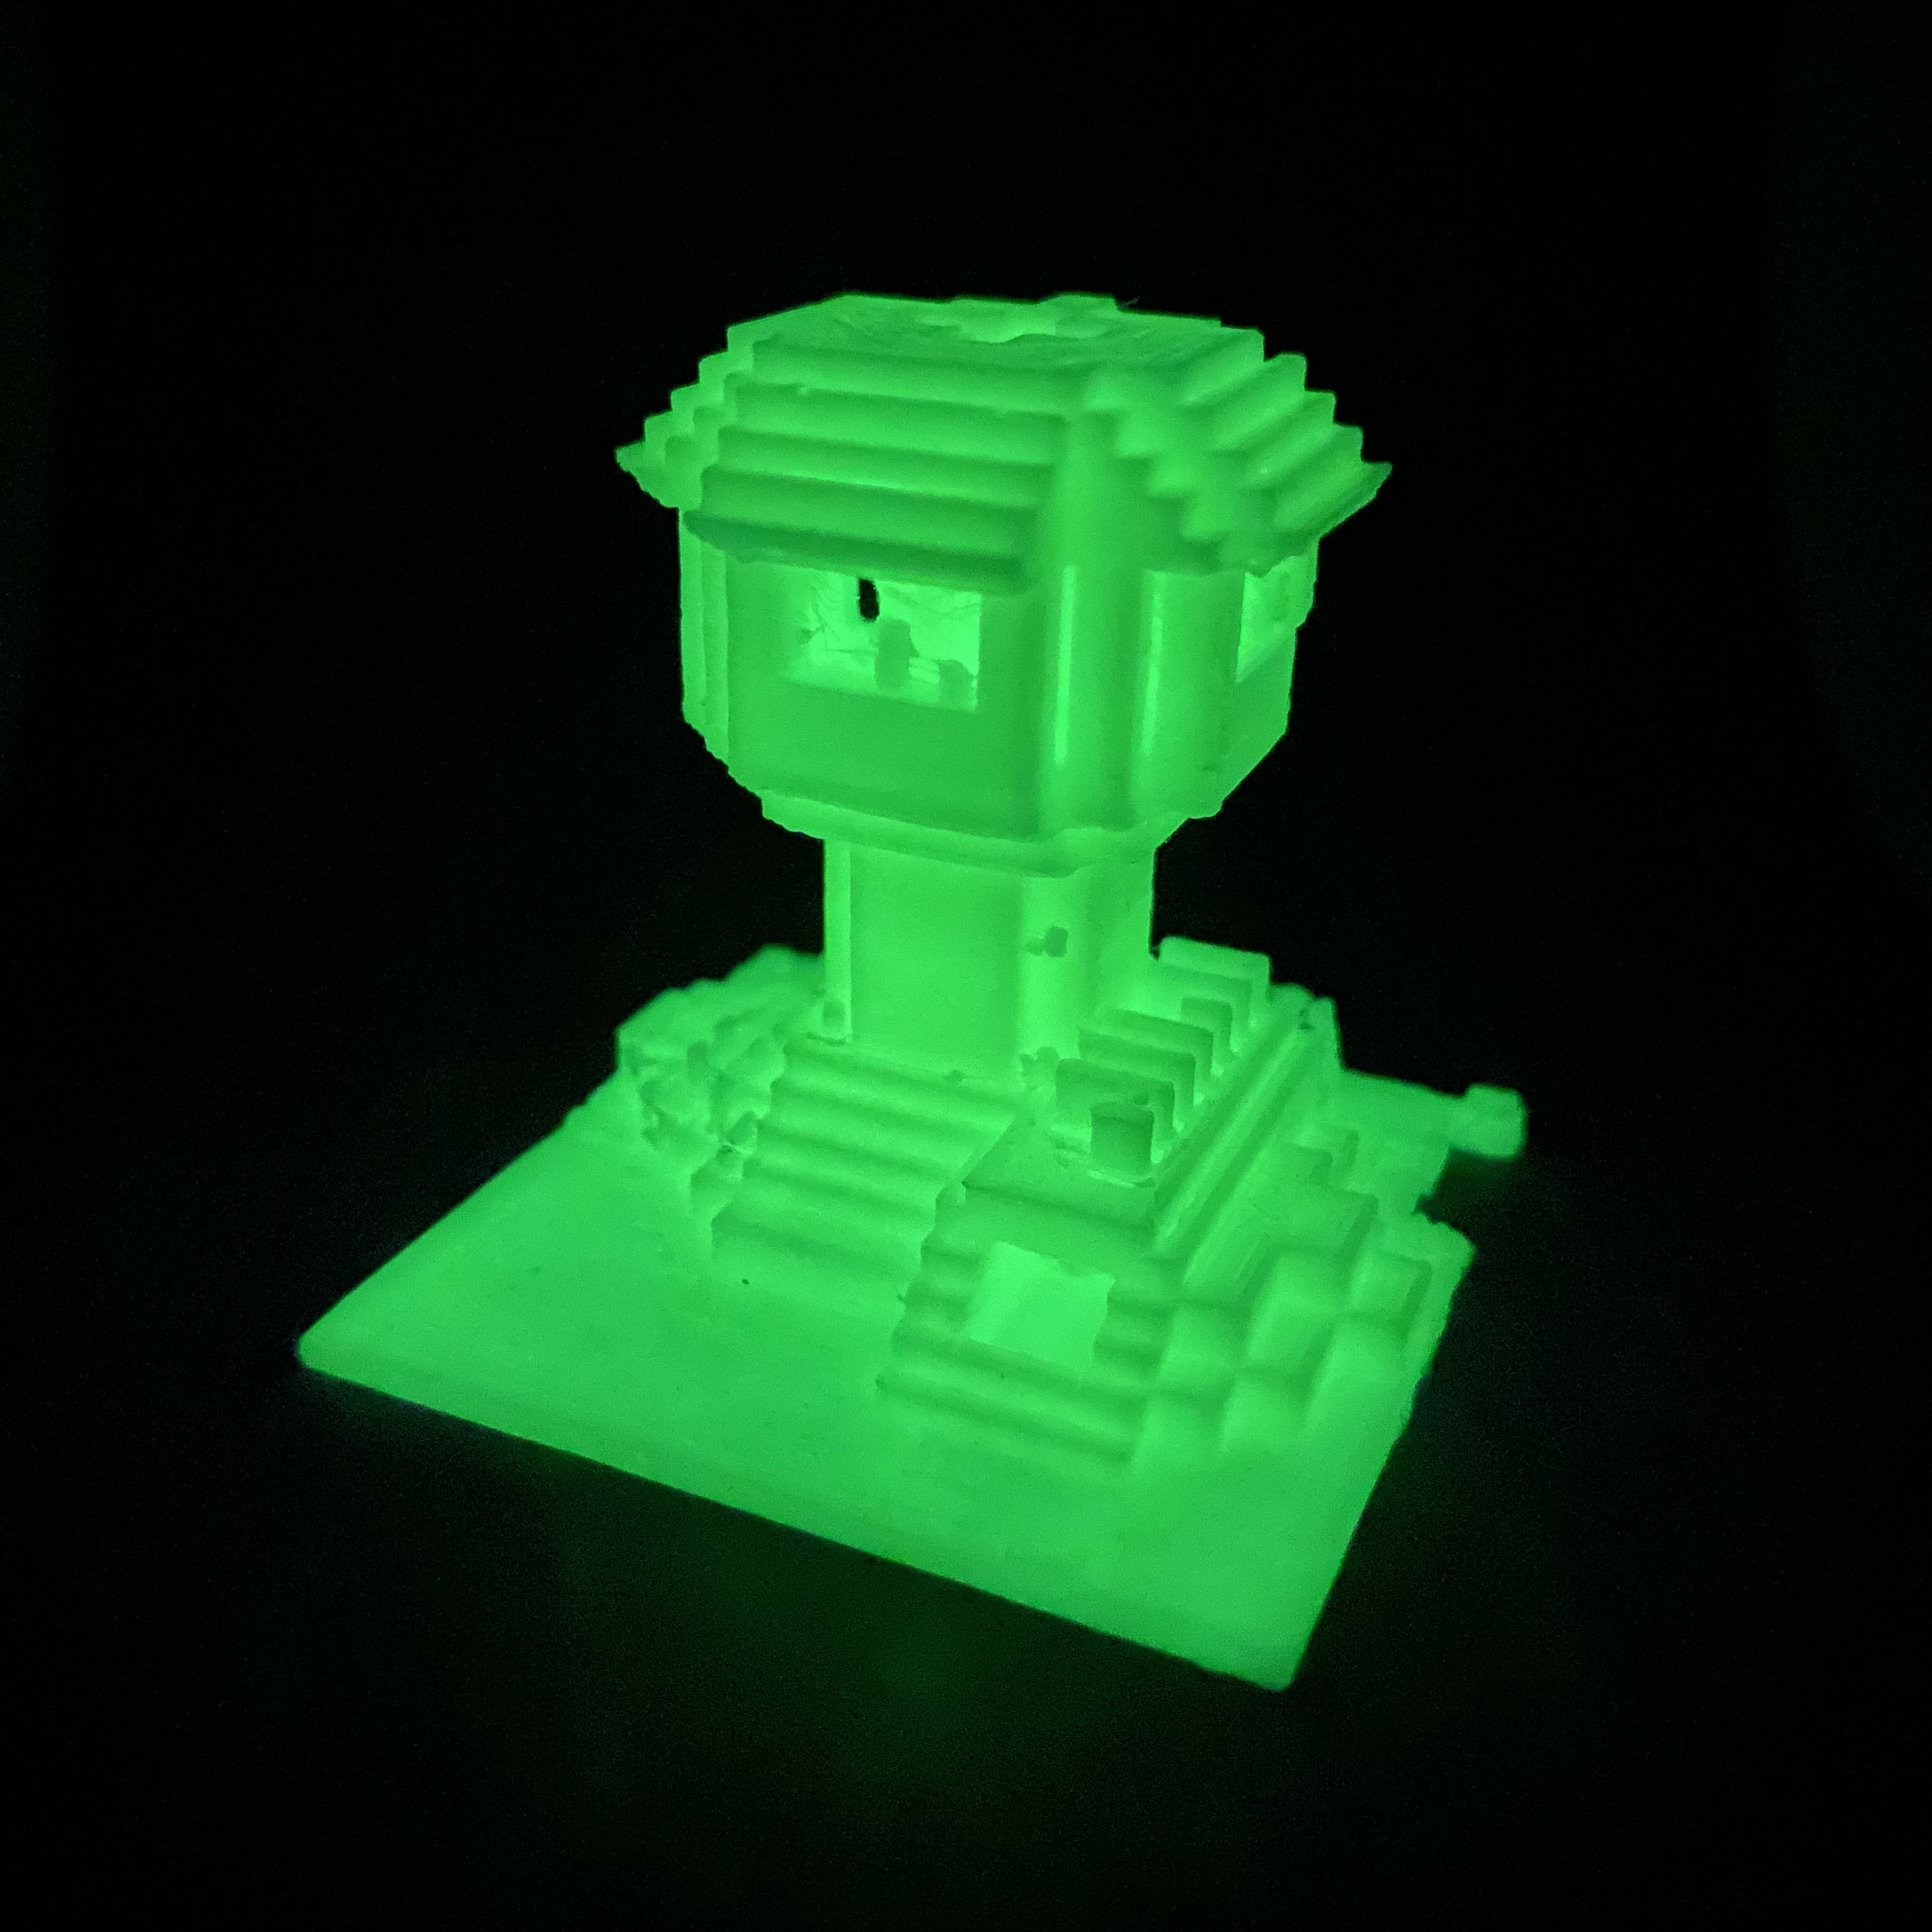 3D printed Minecraft House(back)